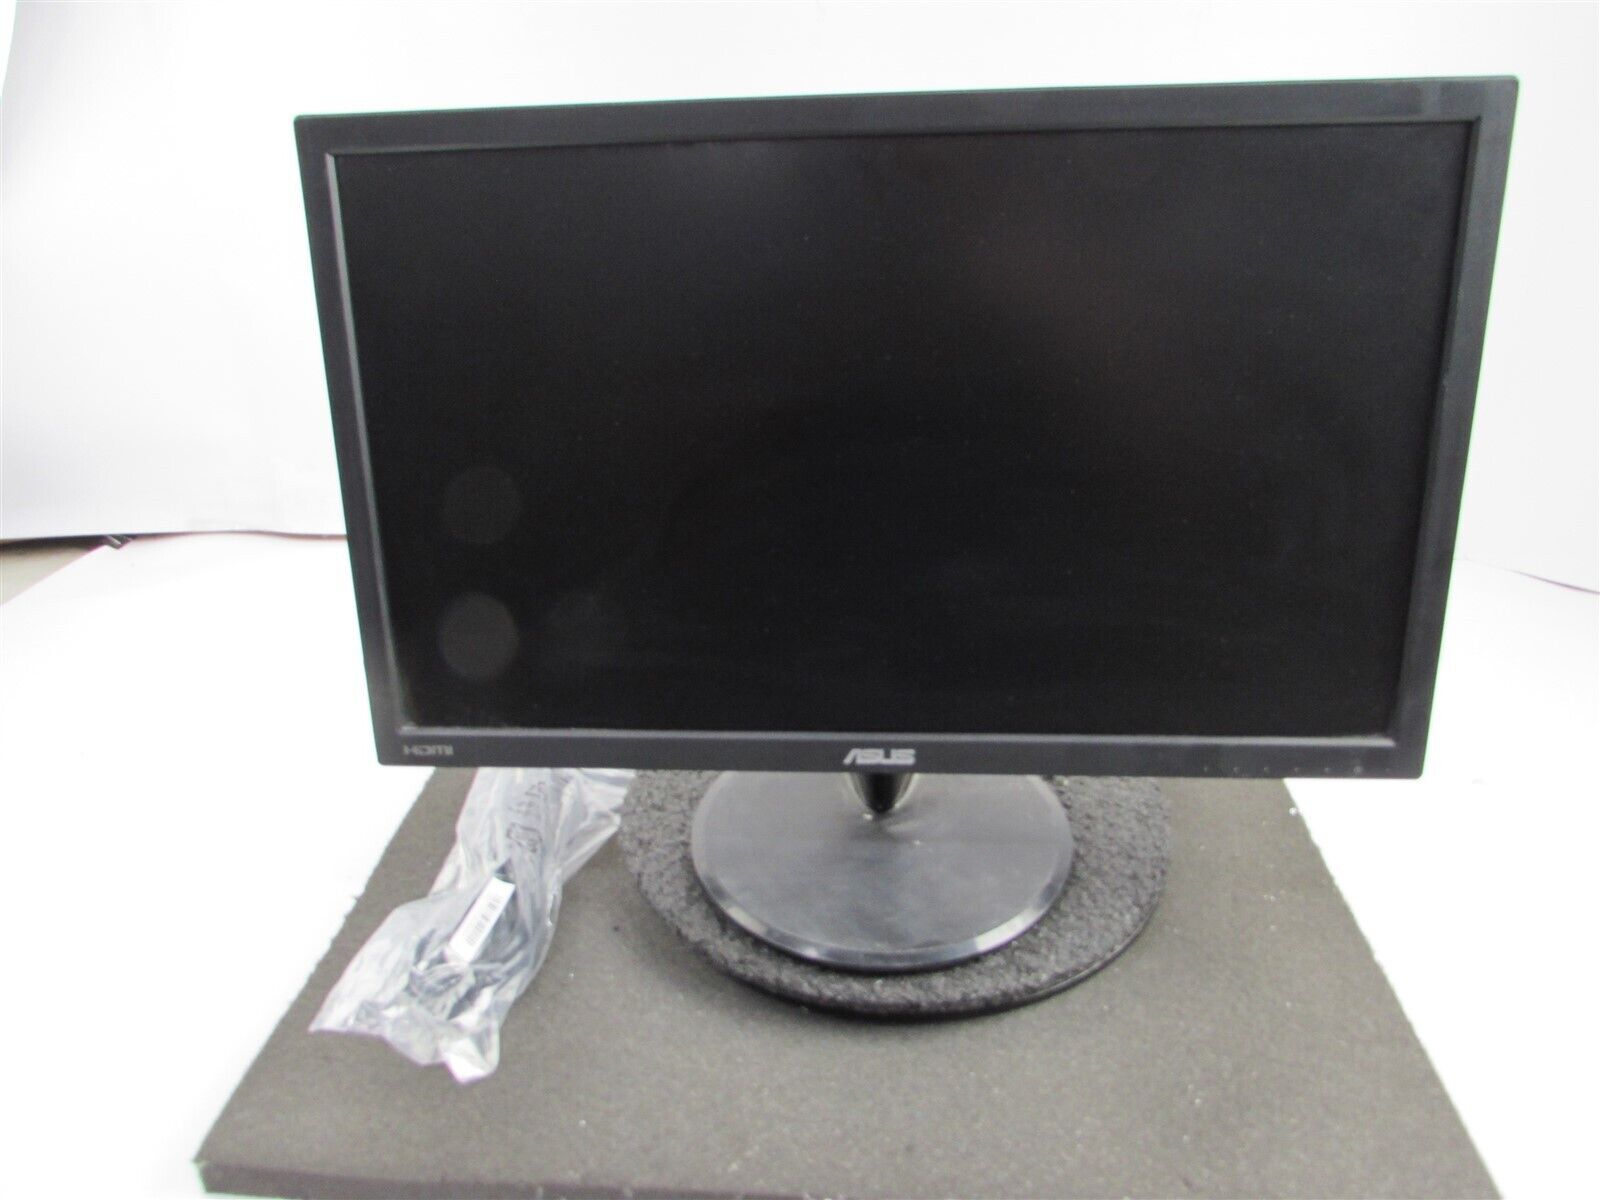 ASUS VP VP228HE VP228 21.5 inch Widescreen LED Gaming Monitor